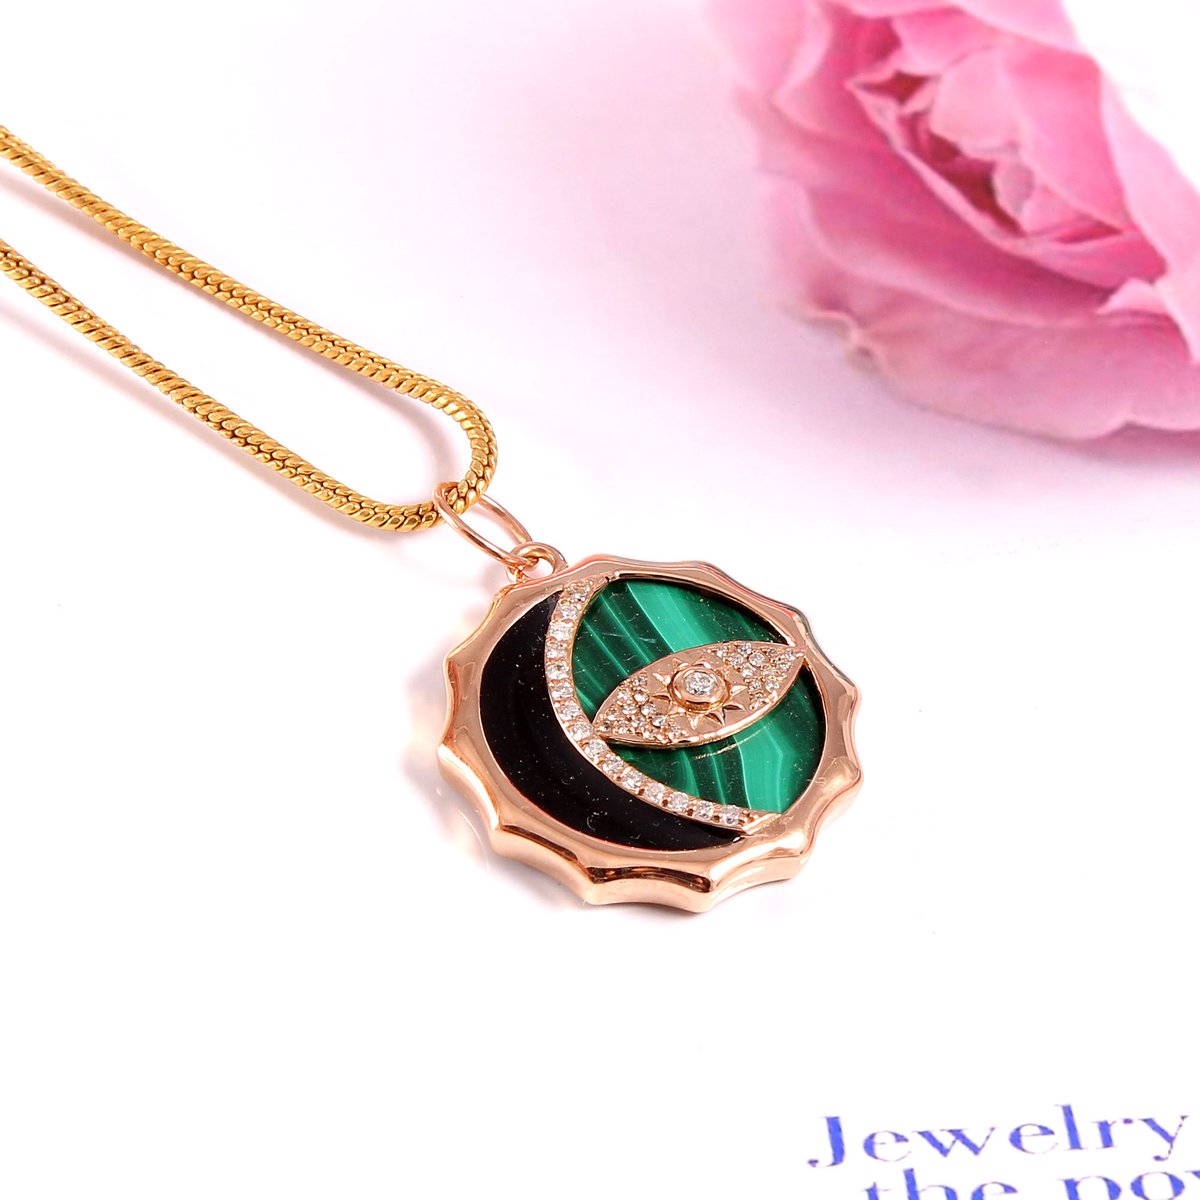 Protect yourself from negative vibes with this 14k solid rose gold evil eye diamond pendant from Jewelldiro! 👁️ #jewelldiro #rosegoldjewelry #evileyejewelry #diamondjewelry #pendantnecklace #jewelryoftheday #accessorize #fashionista #styleinspo #onlineshoppingindia #codavailable